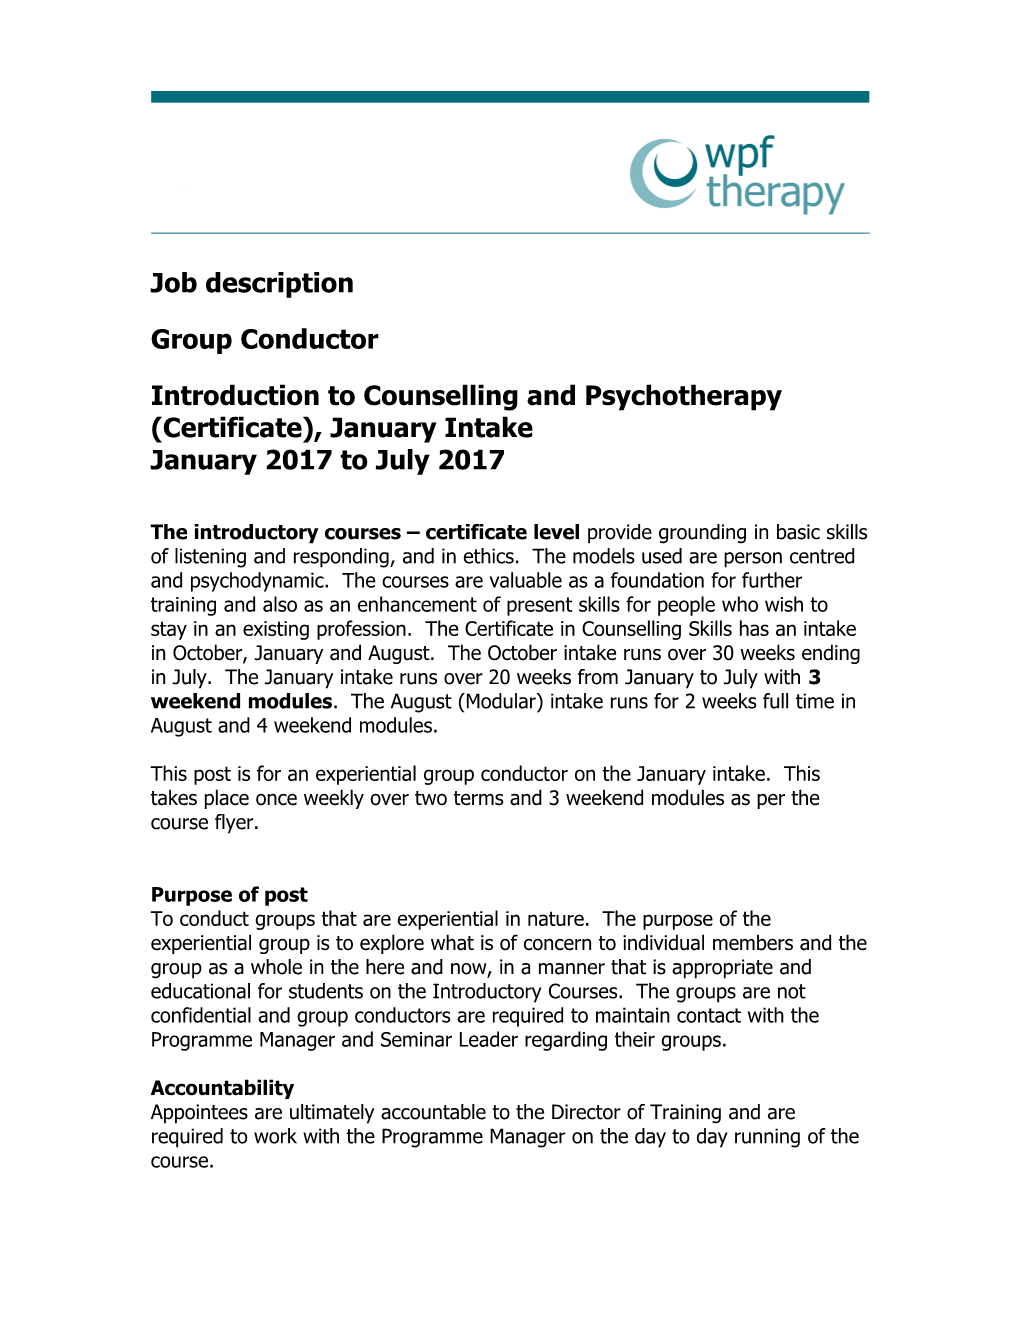 Introduction to Counselling and Psychotherapy (Certificate), January Intake